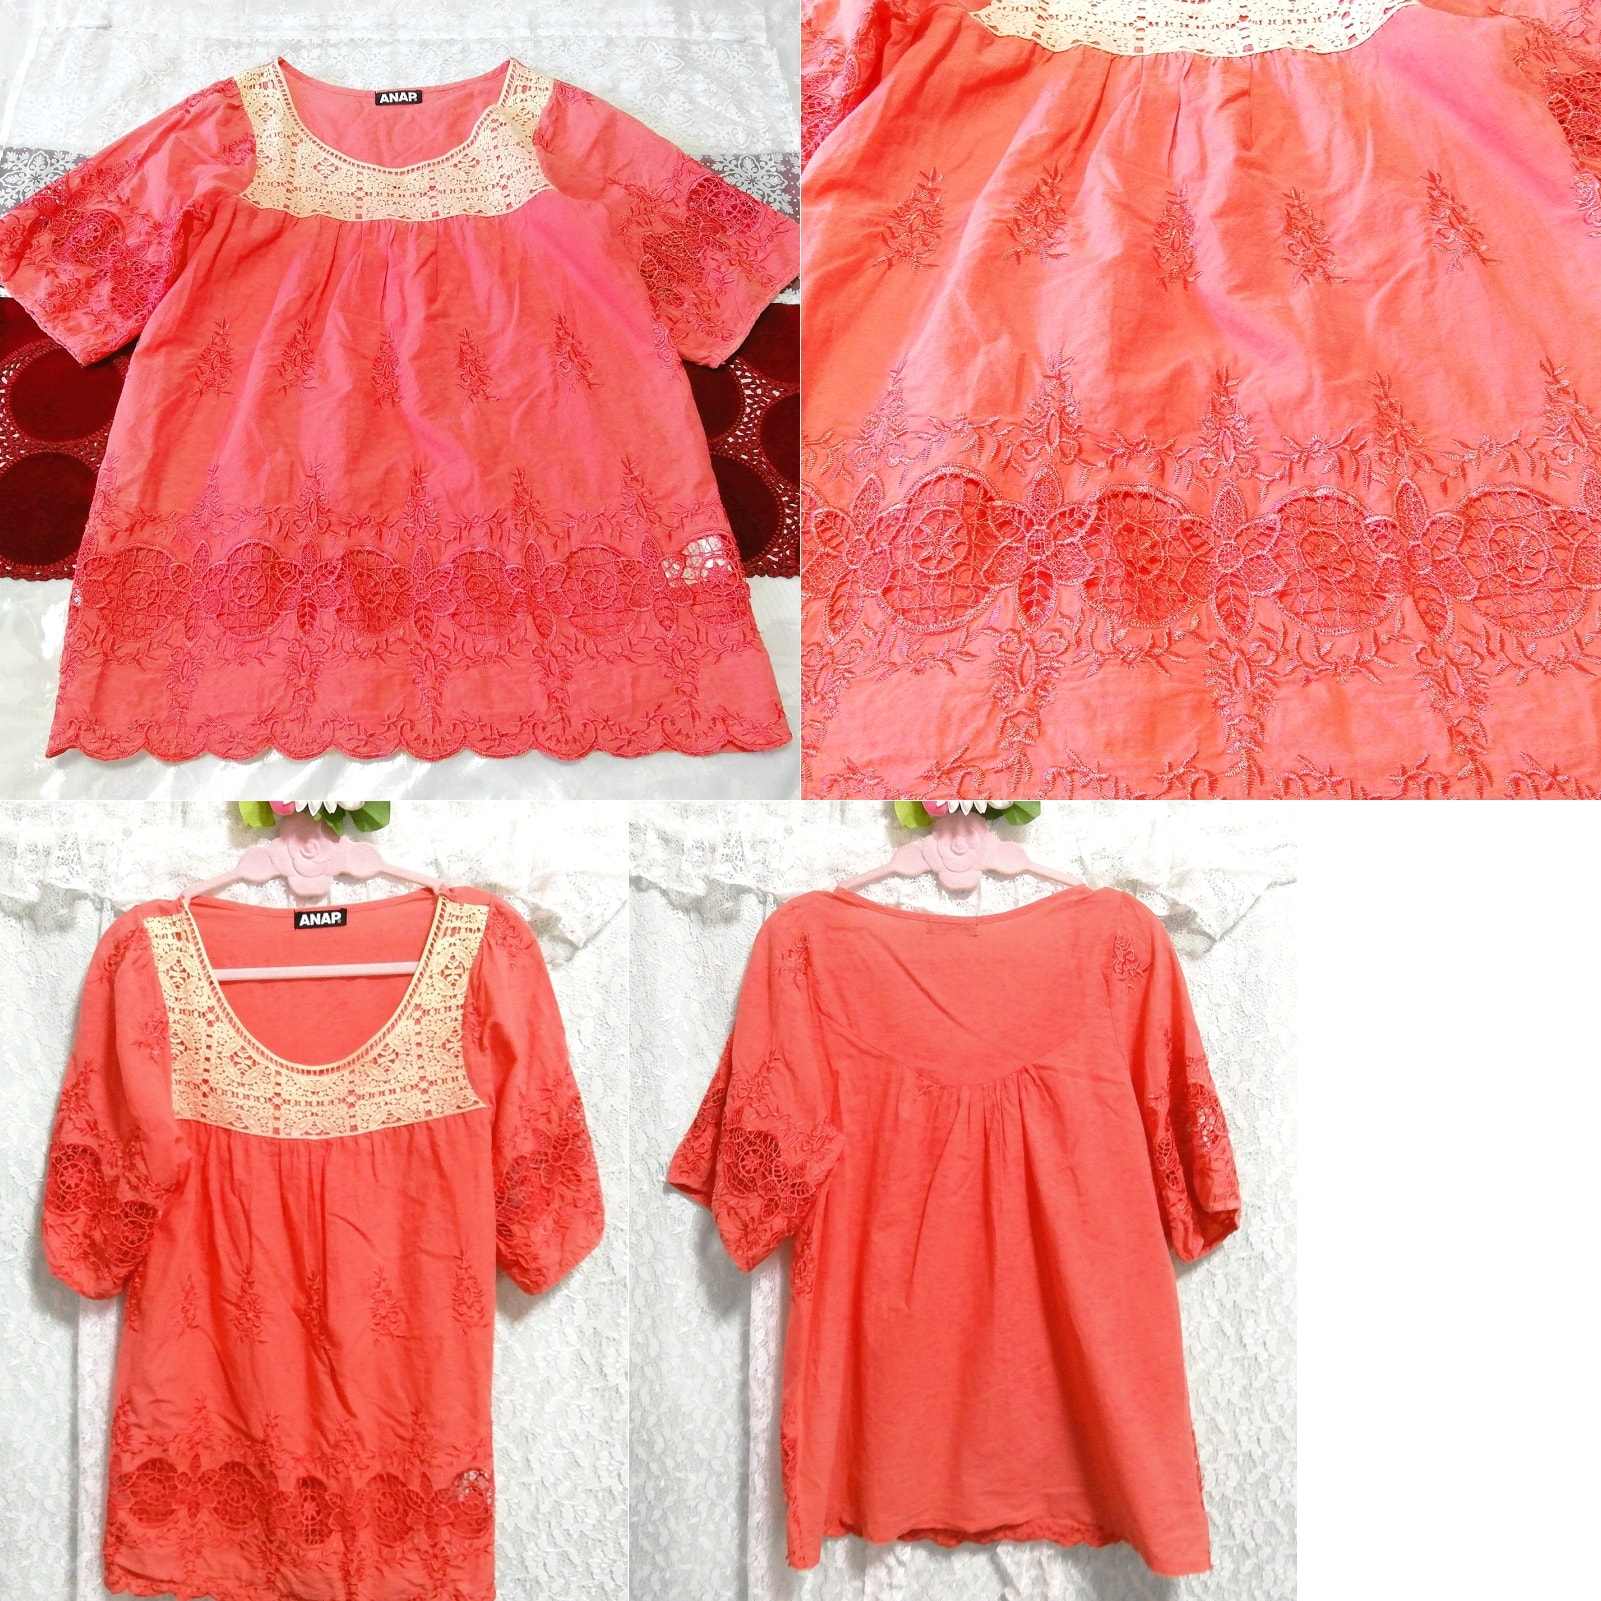 Red pink flaxen lace cotton cotton lace short sleeve tunic negligee nightgown dress, tunic, short sleeve, m size